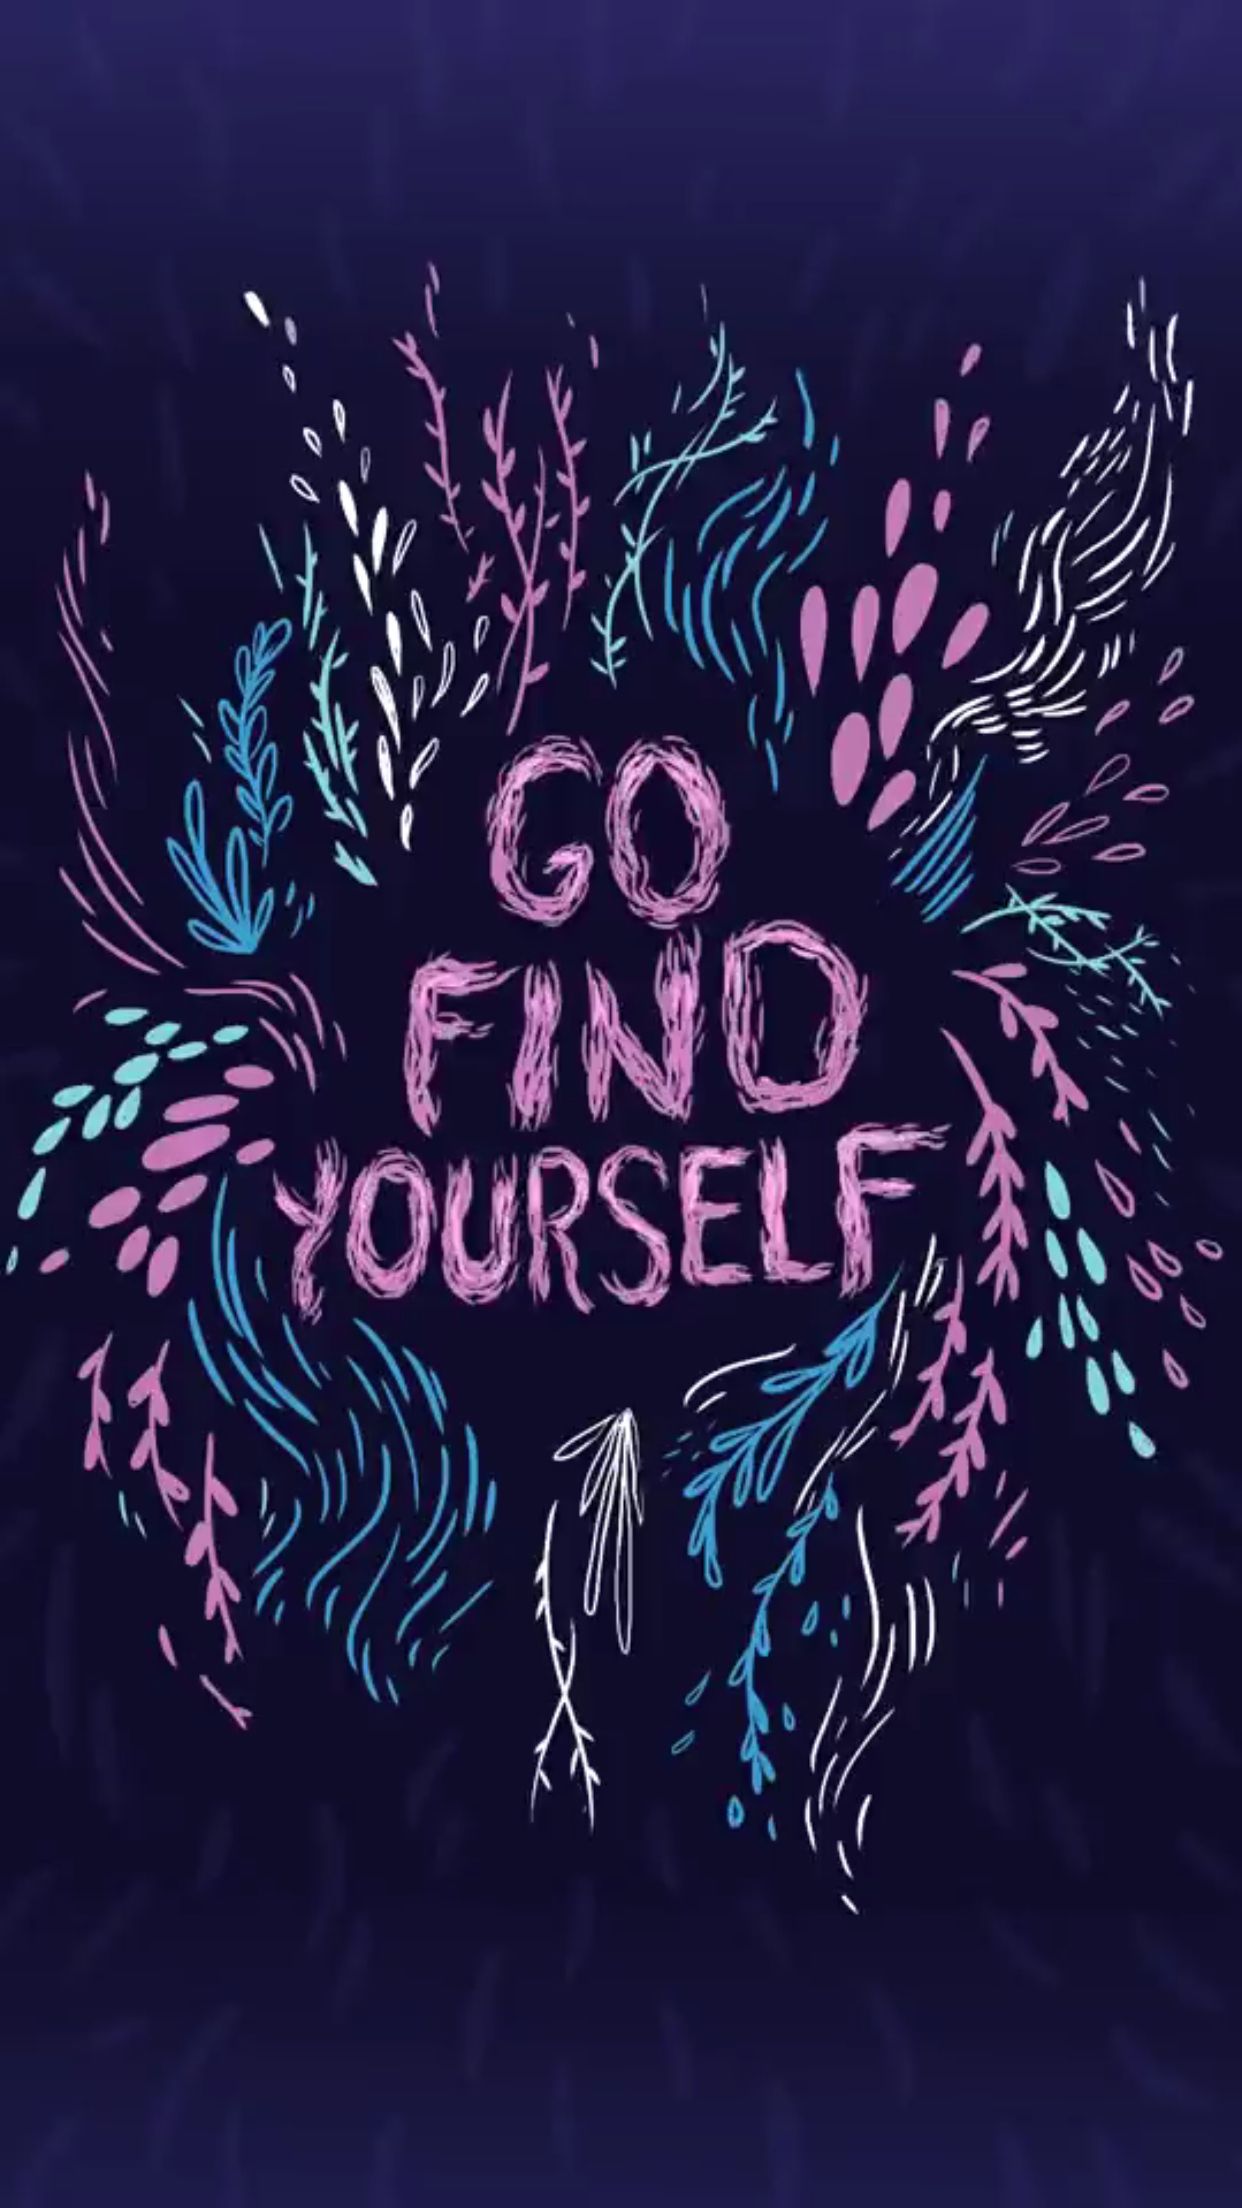 Go find yourself wallpaper. Feeling blue quotes, Pop art wallpaper, Finding yourself